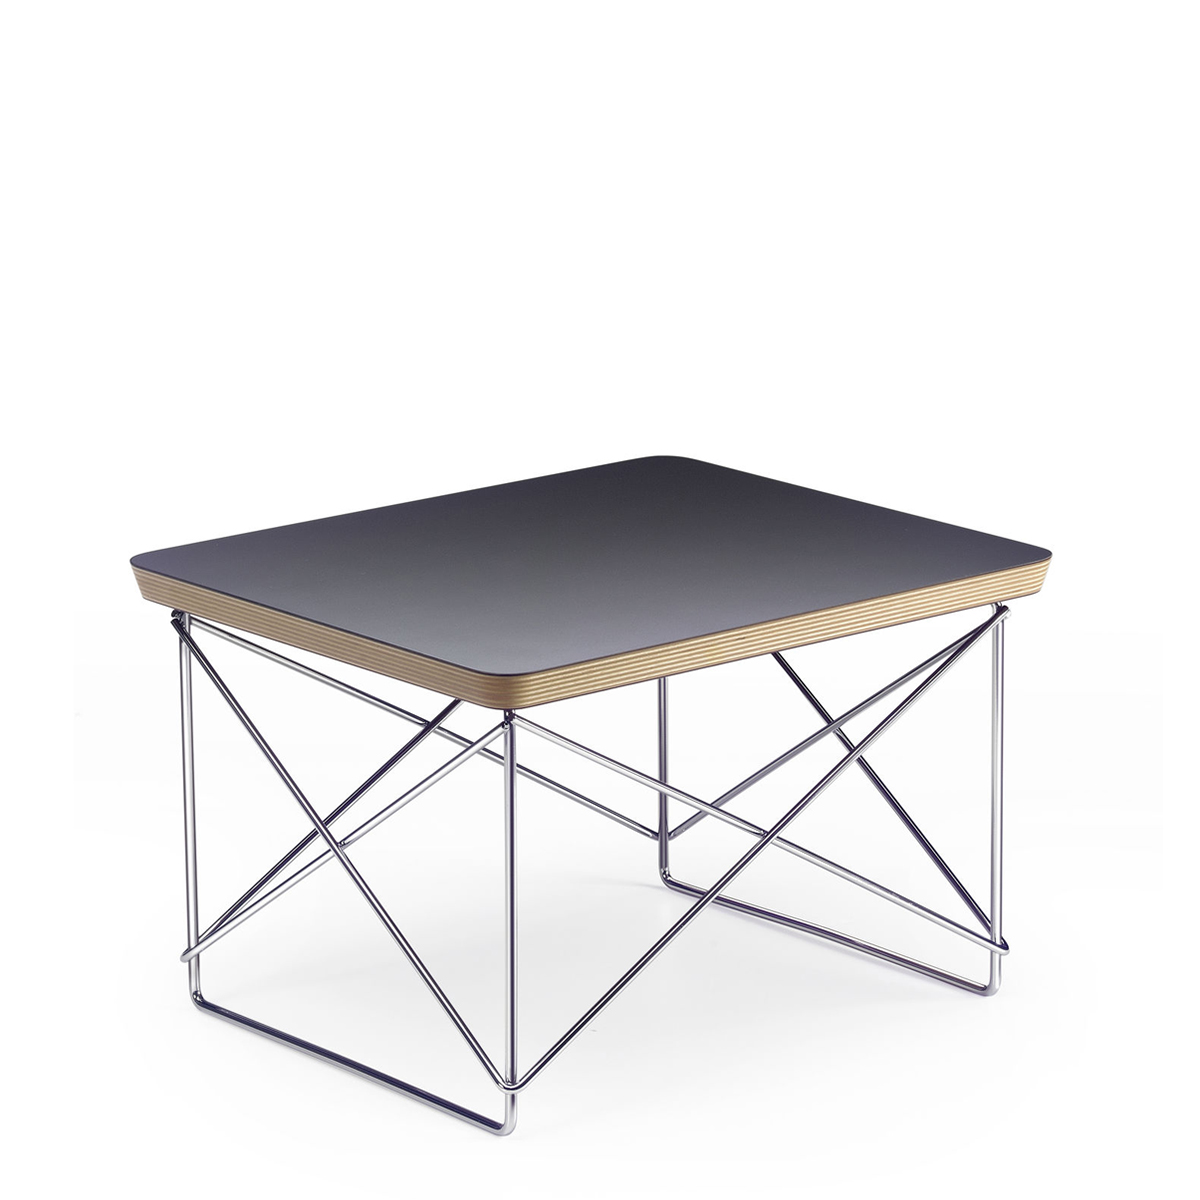 Vitra Occasional Table LTR